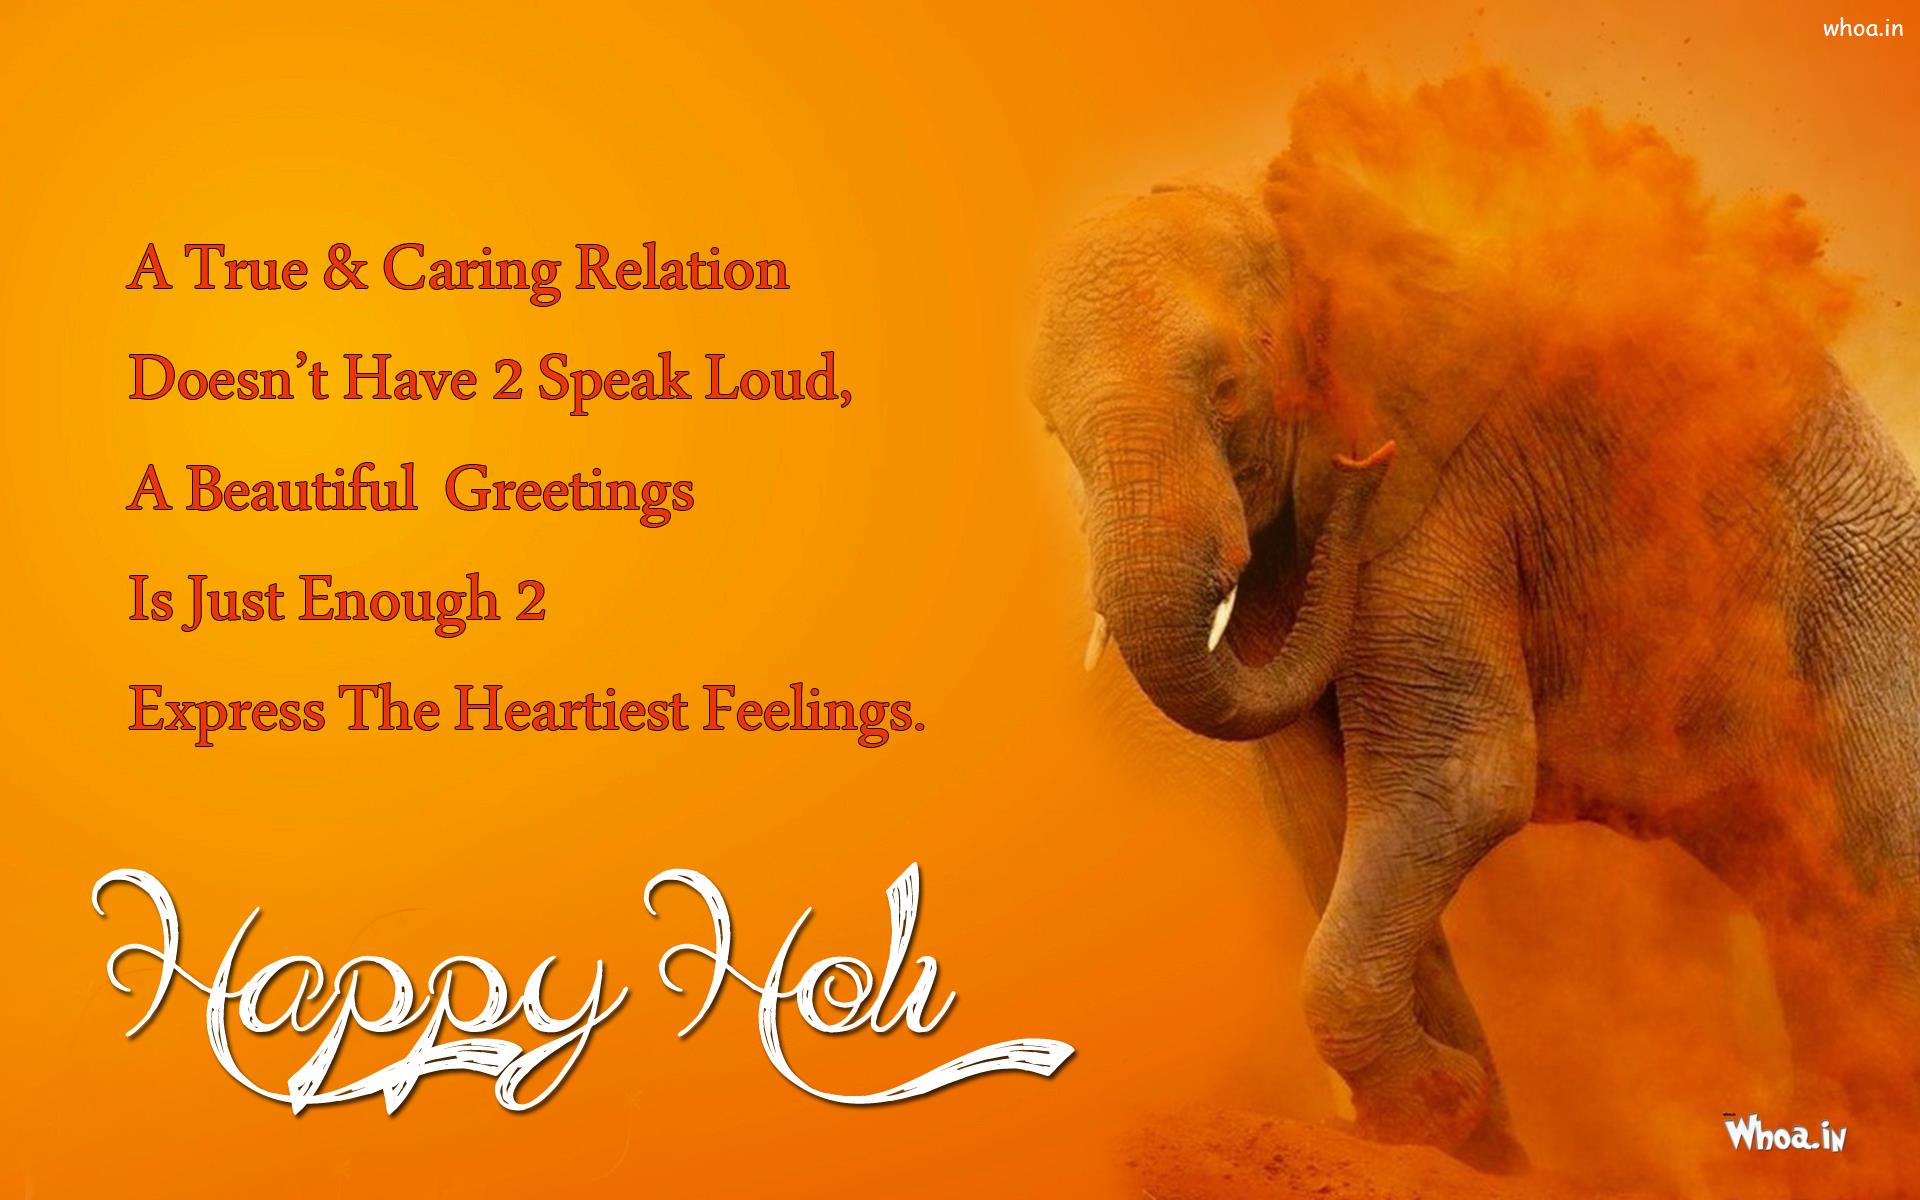 Happy Holi Greetings Quote With A True And Caring Relation